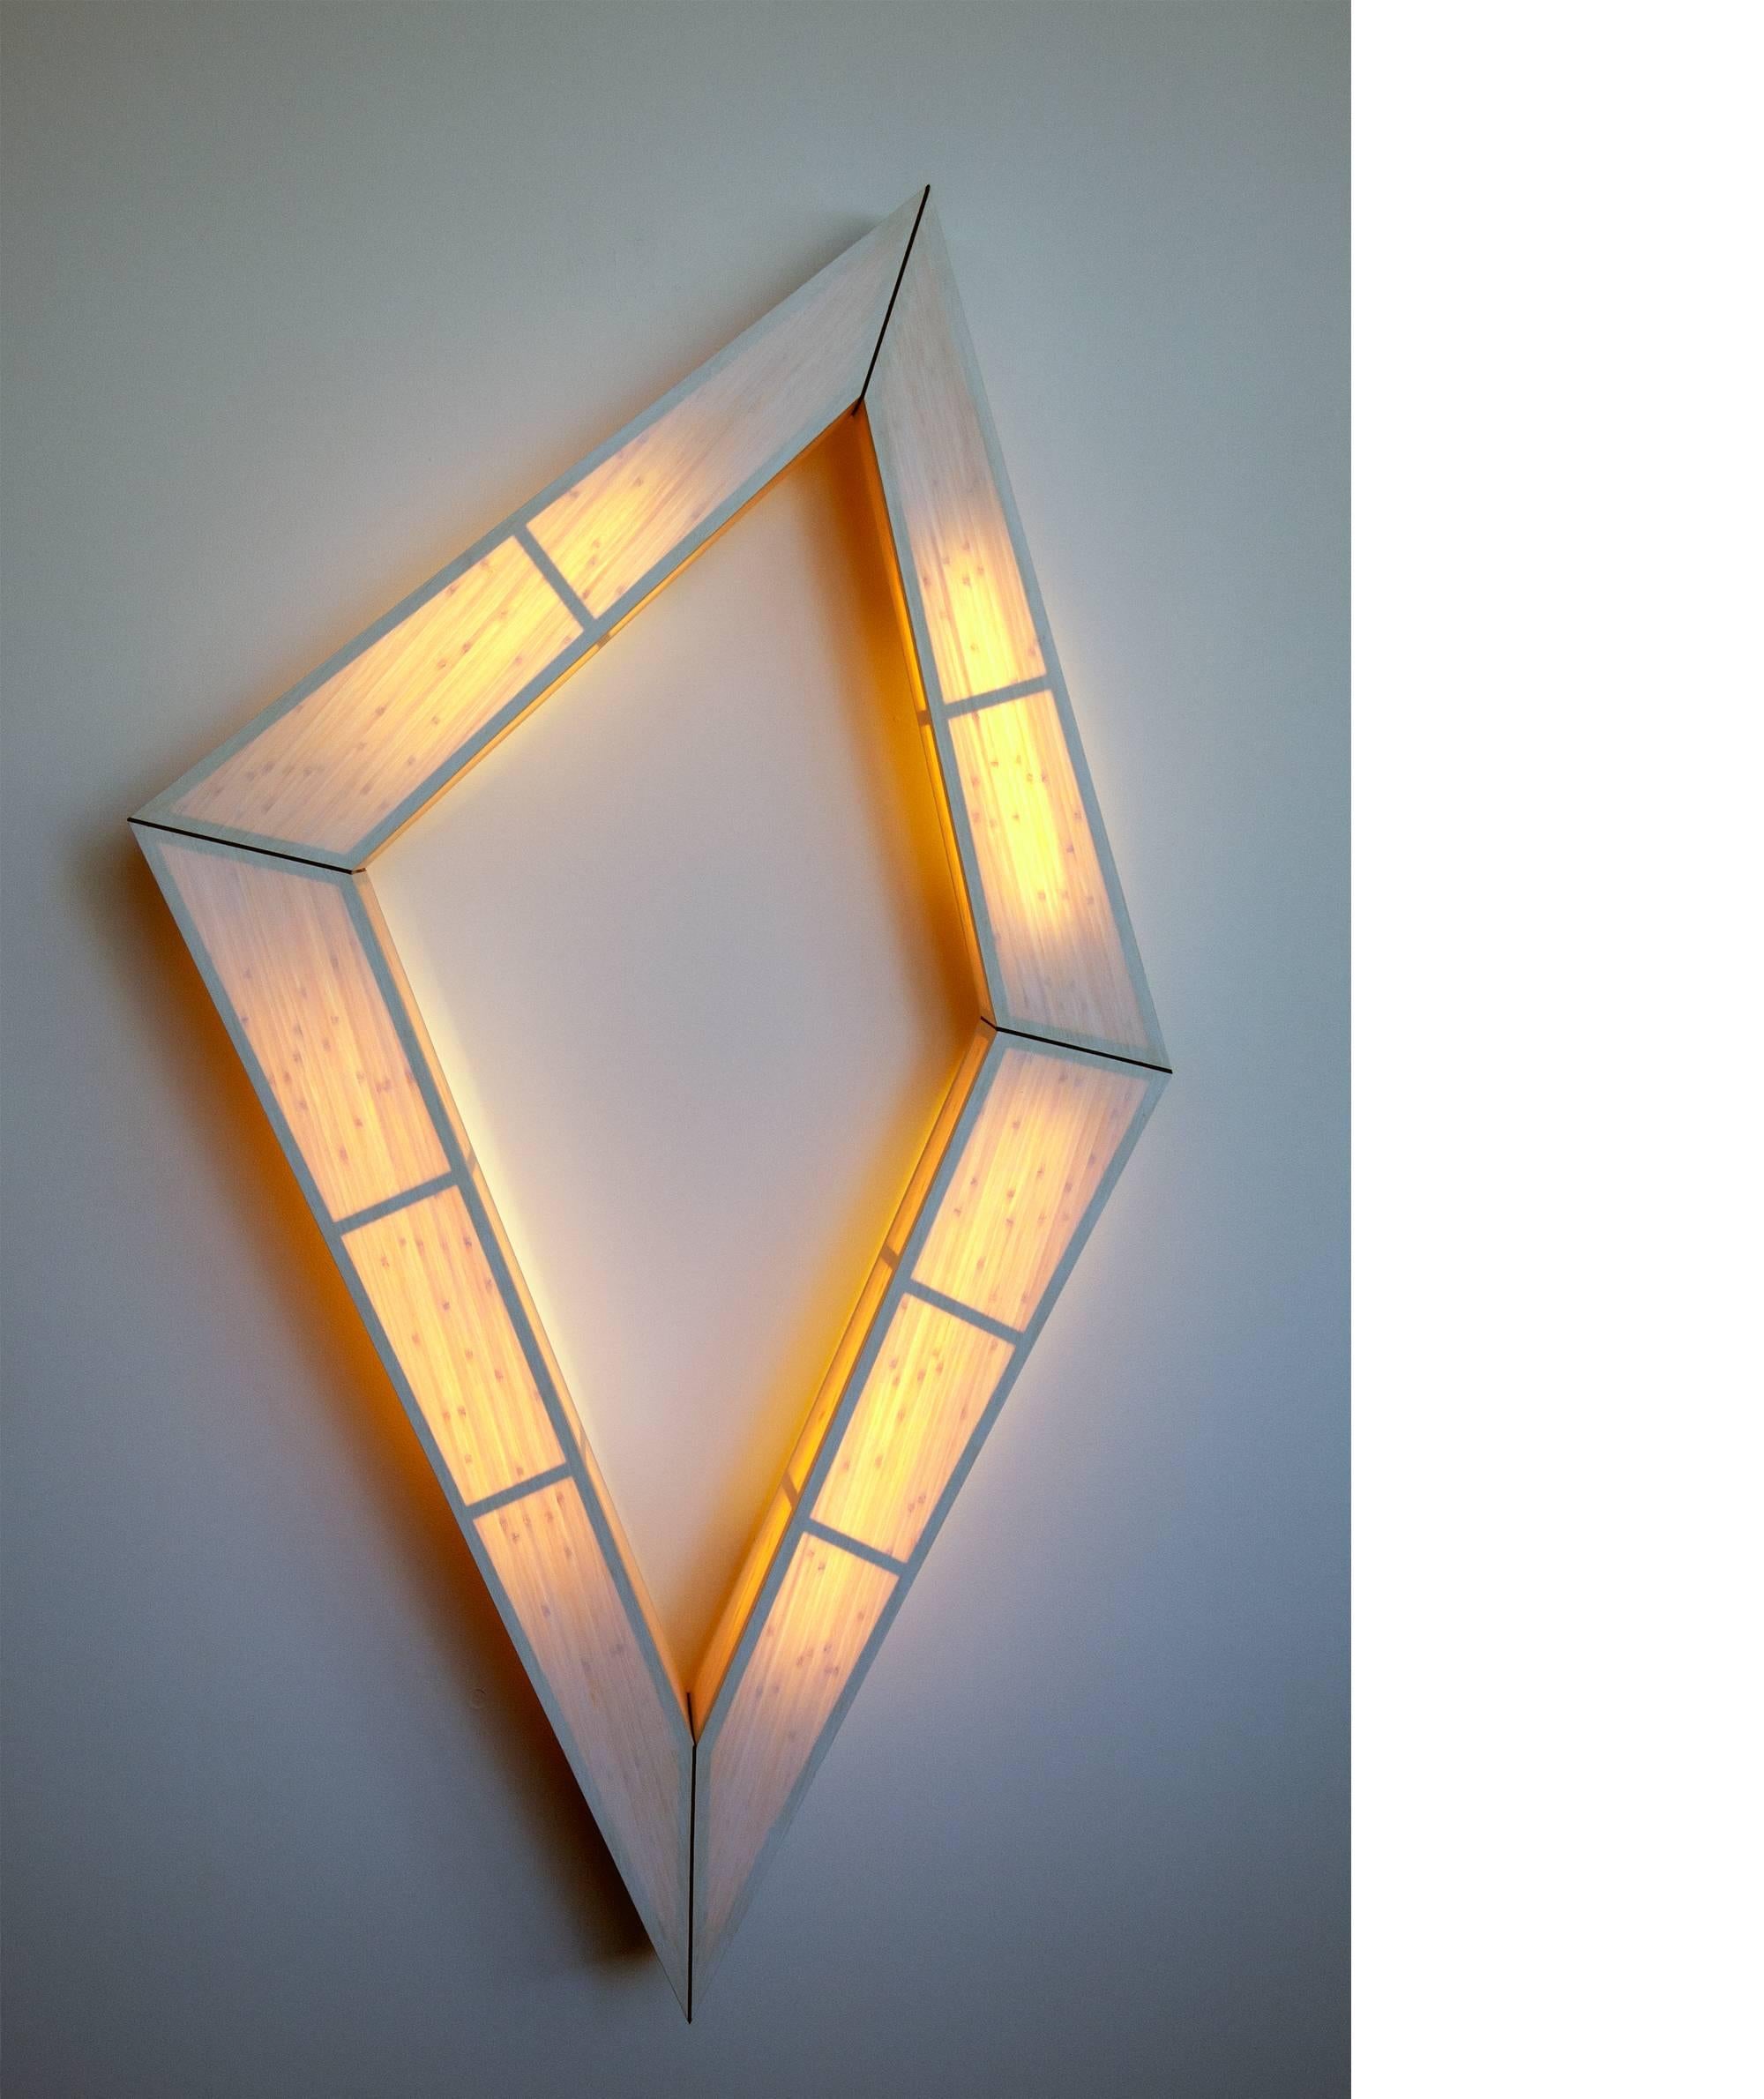 This large wall-mounted lighting piece defies expectation. It appears as solid sculptural object when off and elegantly transforms into a floating light-body when switched on. In the central open area you can specify a mirror as an optional add-on.